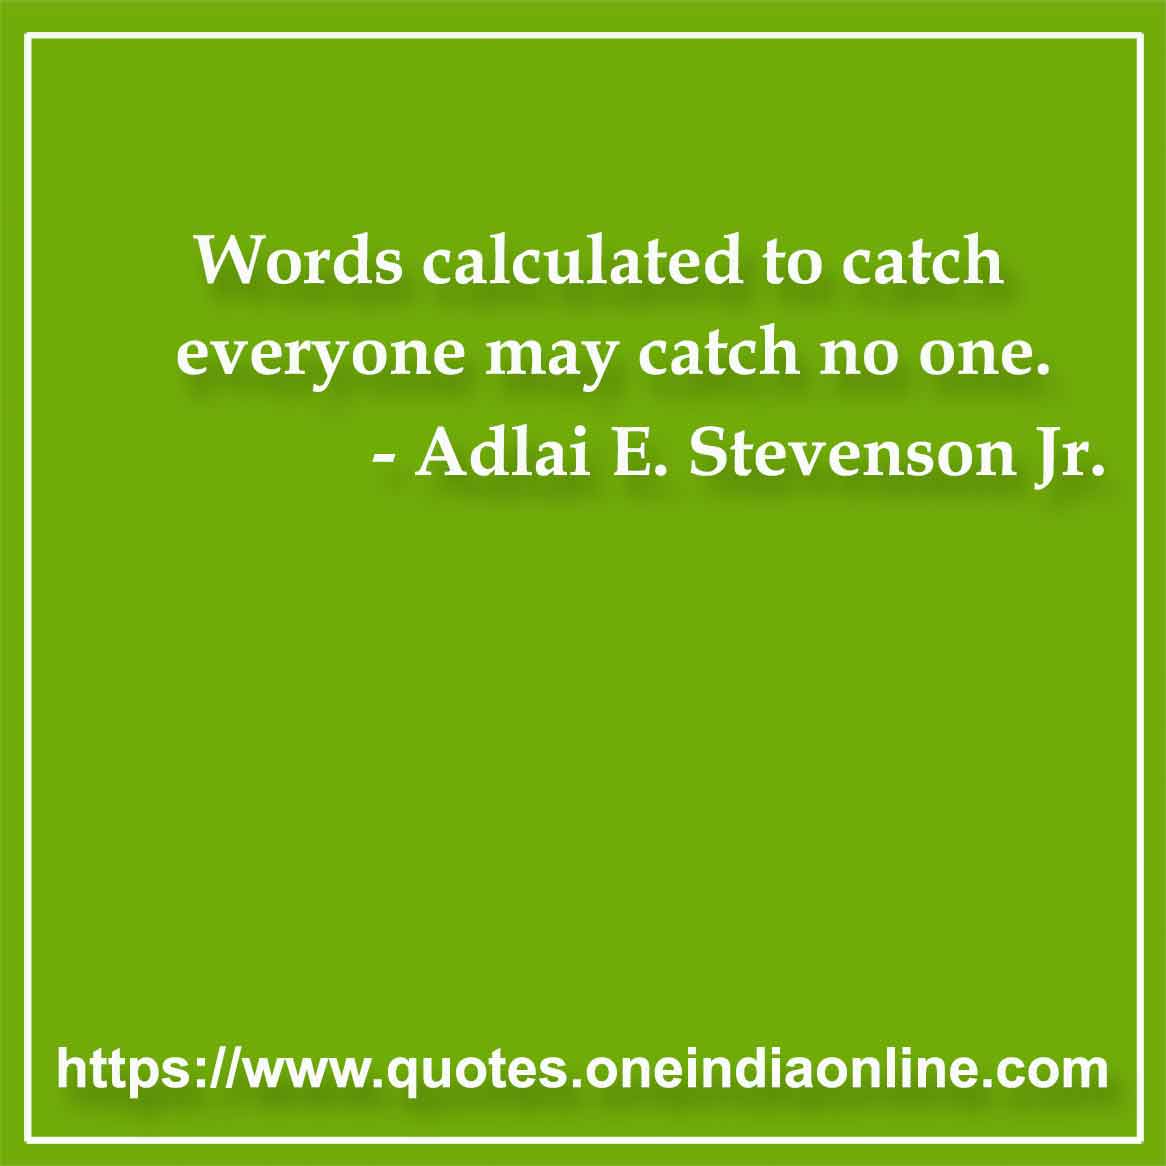 Words calculated to catch everyone may catch no one.

- Language Quotes by Adlai E. Stevenson Jr. 